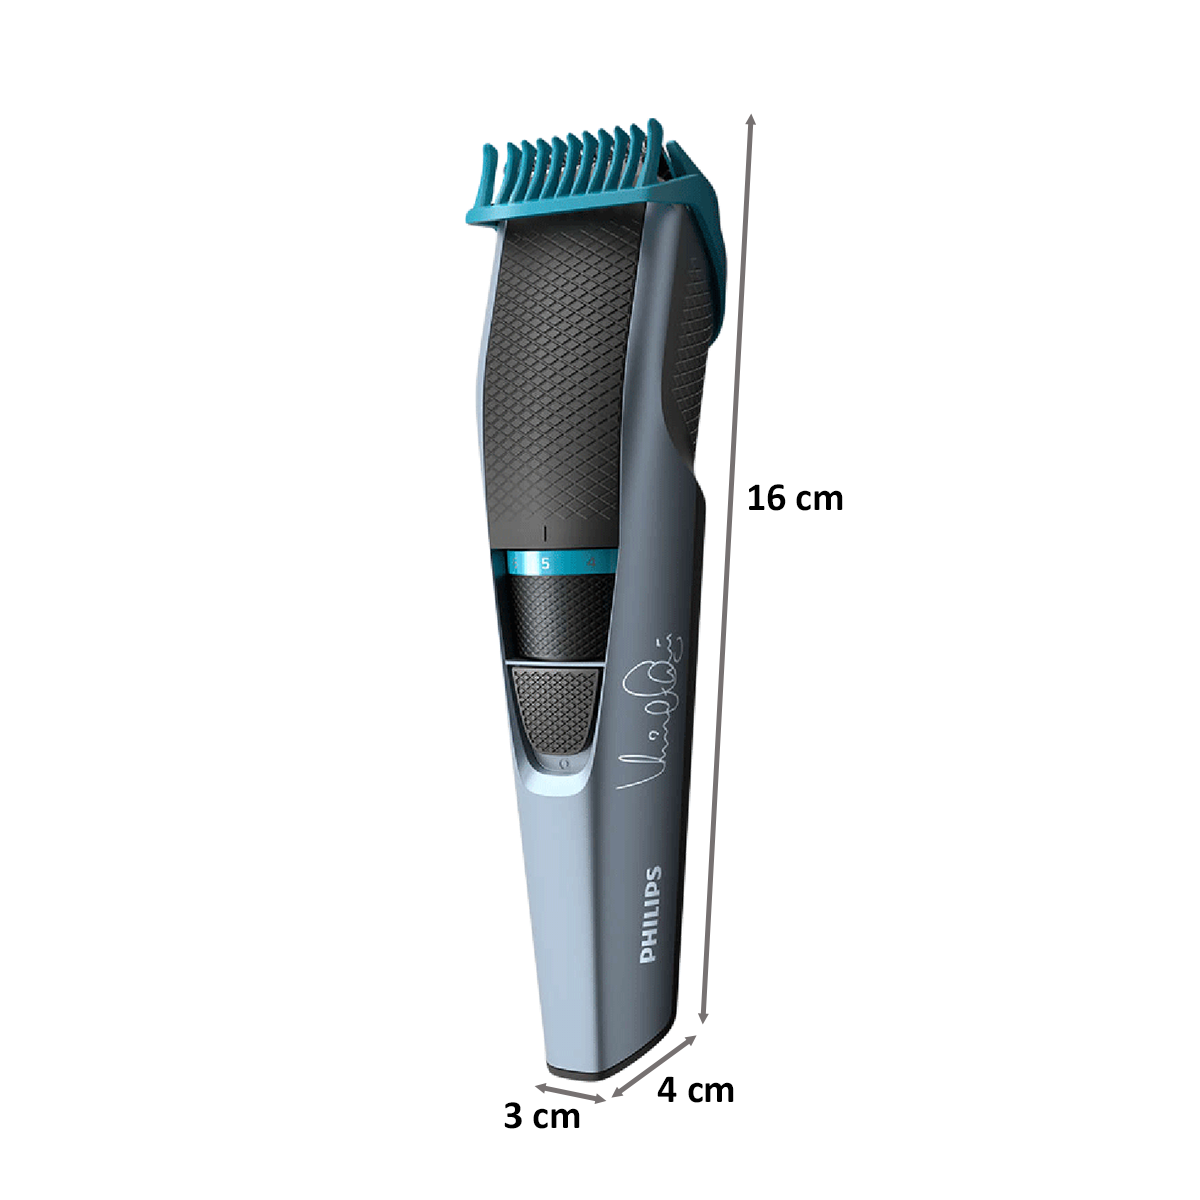 Philips Beardtrimmer Series 3000 Stainless Steel Blades Cordless Beard Trimmer (60 Min Run Time/10h Charge, 10 Length Settings, BT3102/15, Black/Grey)_2